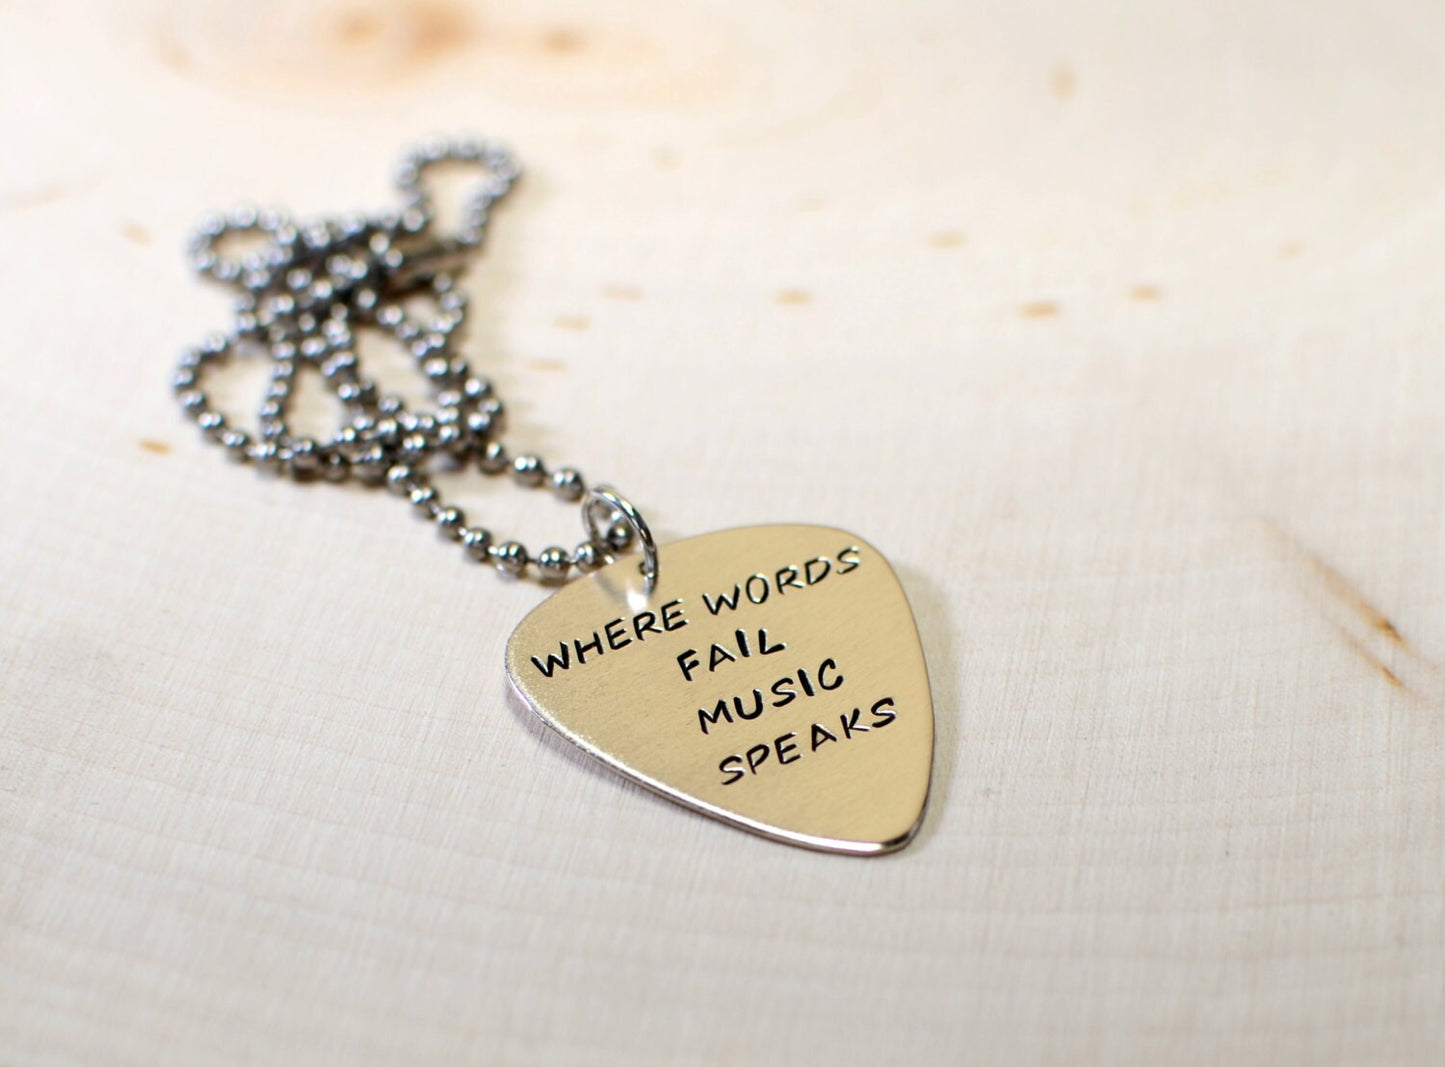 Necklace with Where words fail music speaks on sterling silver guitar pick